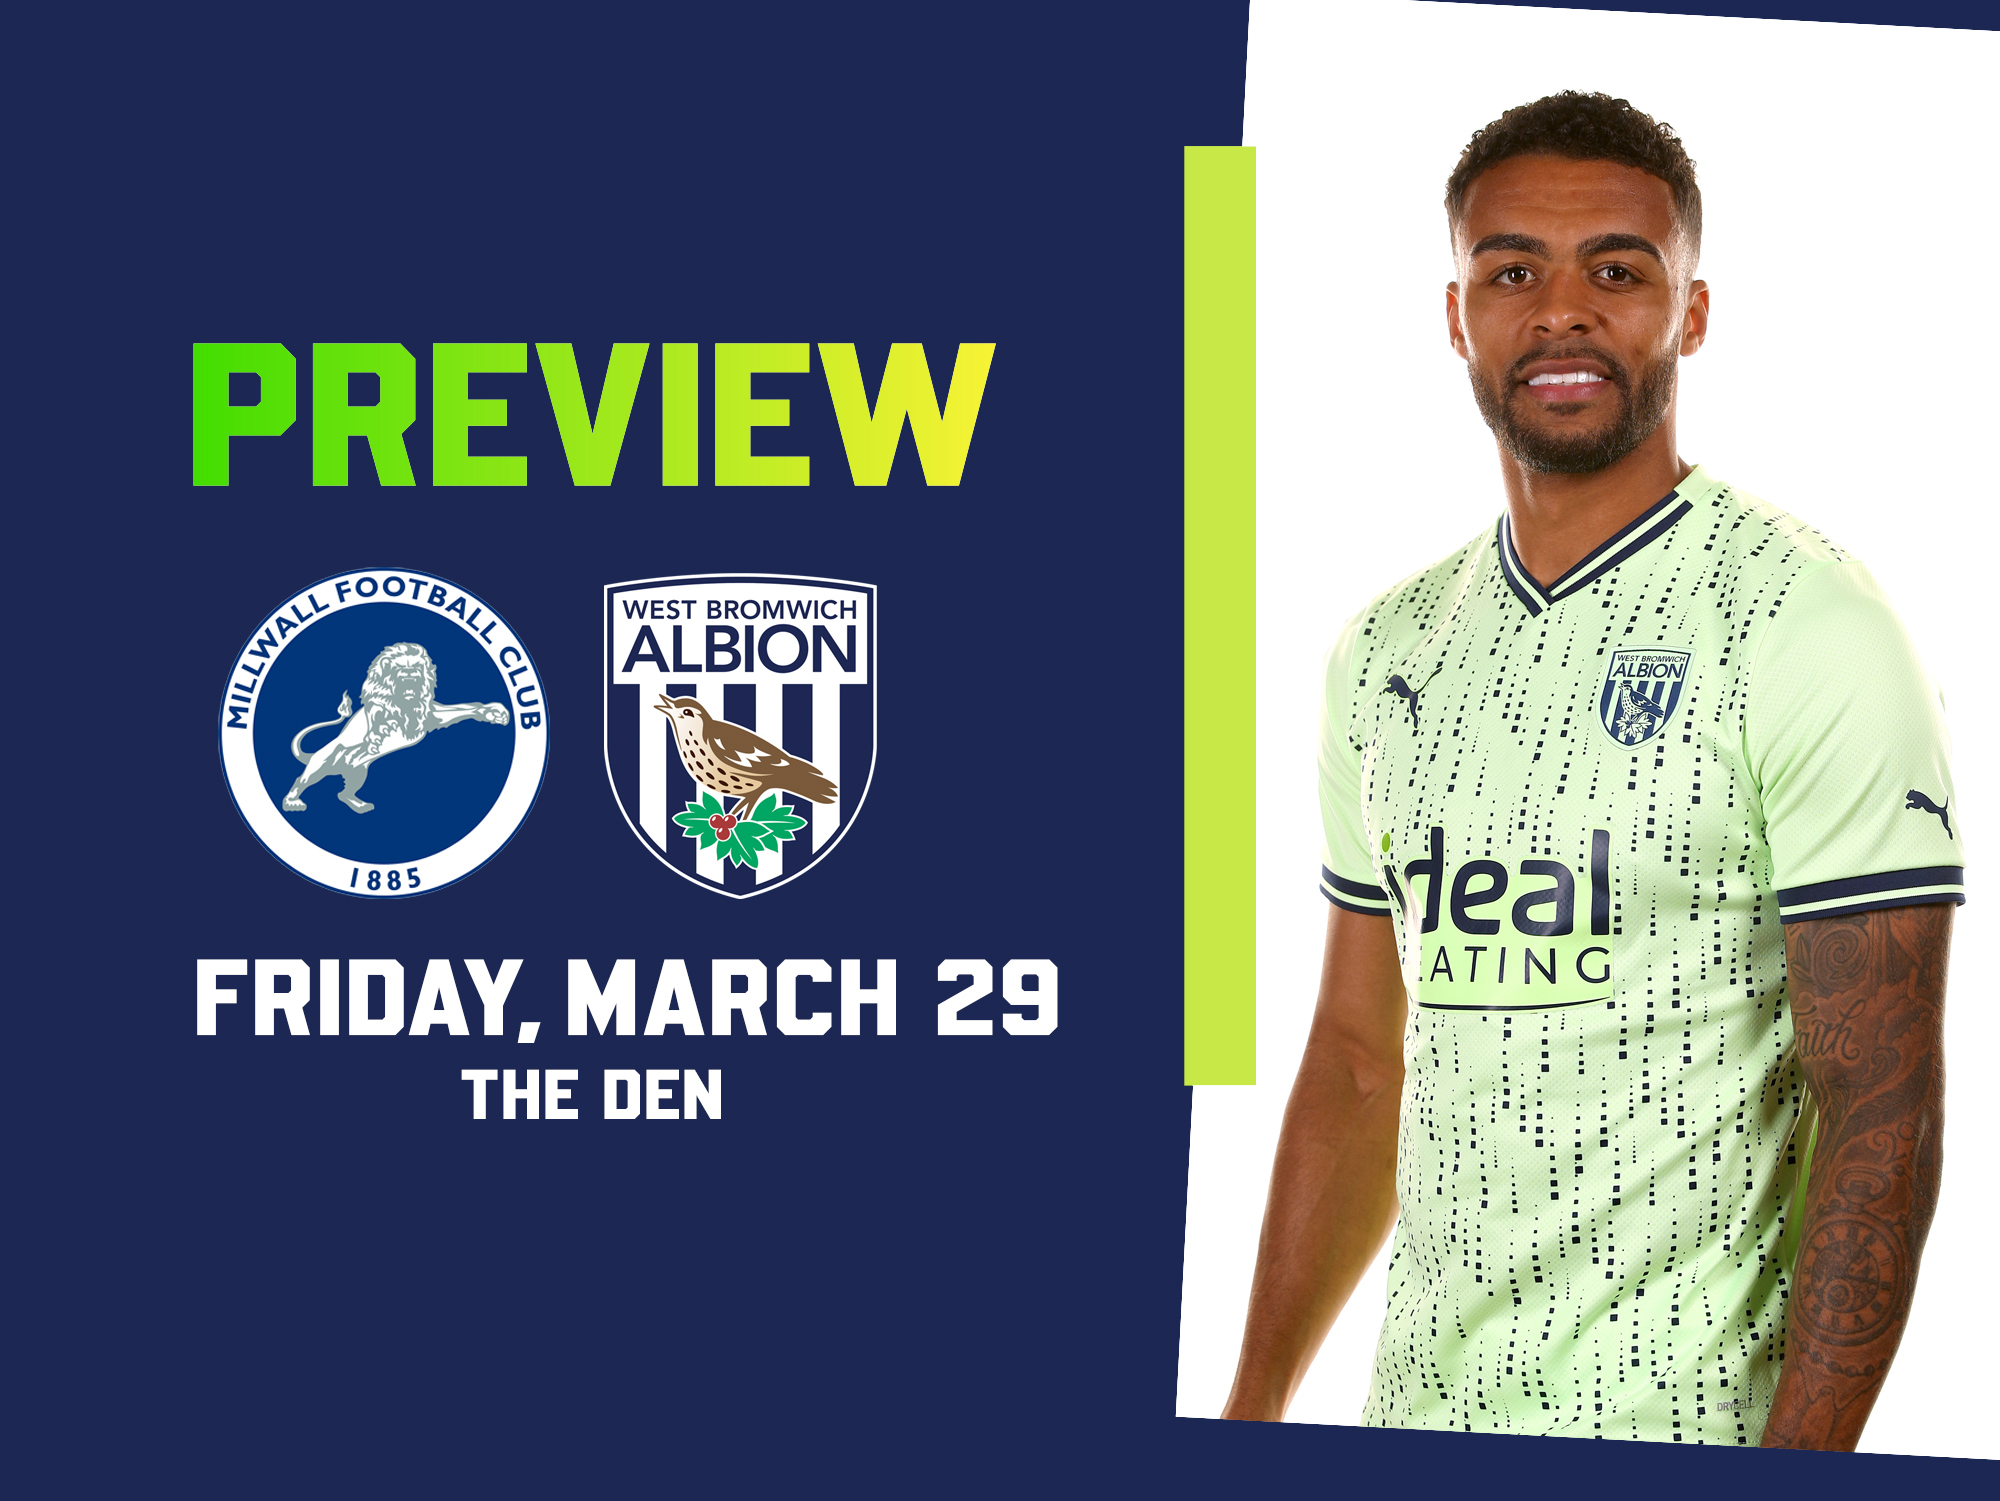 Millwall and WBA badges on the lime green match preview away graphic with an image of Darnell Furlong smiling at the camera while wearing the lime green away shirt